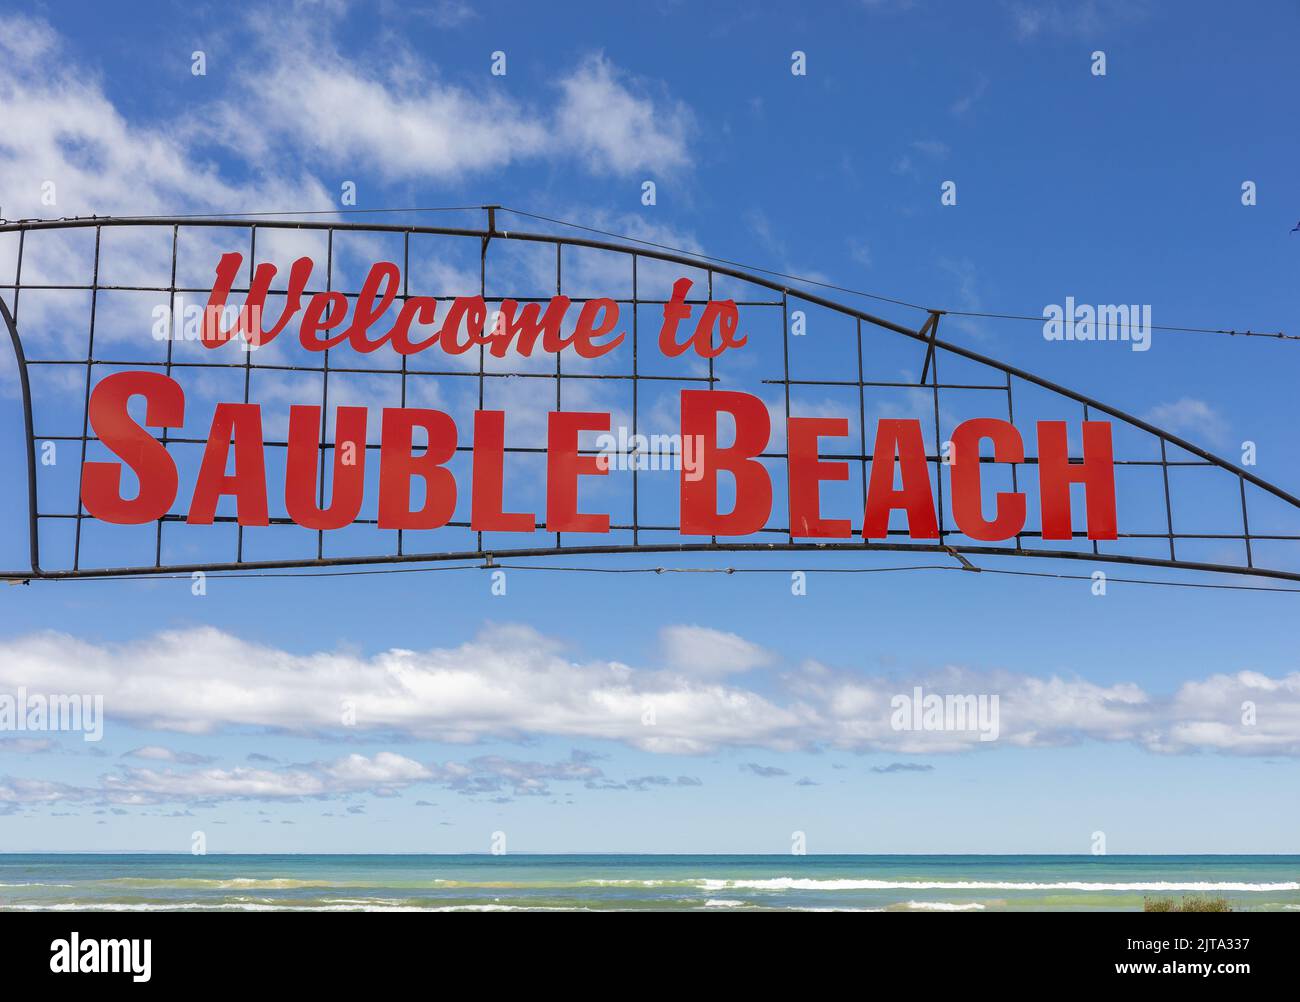 Welcome To Sauble Beach Sign At The Entrance To The Beach On Lake Huron Ontario Canada Stock Photo